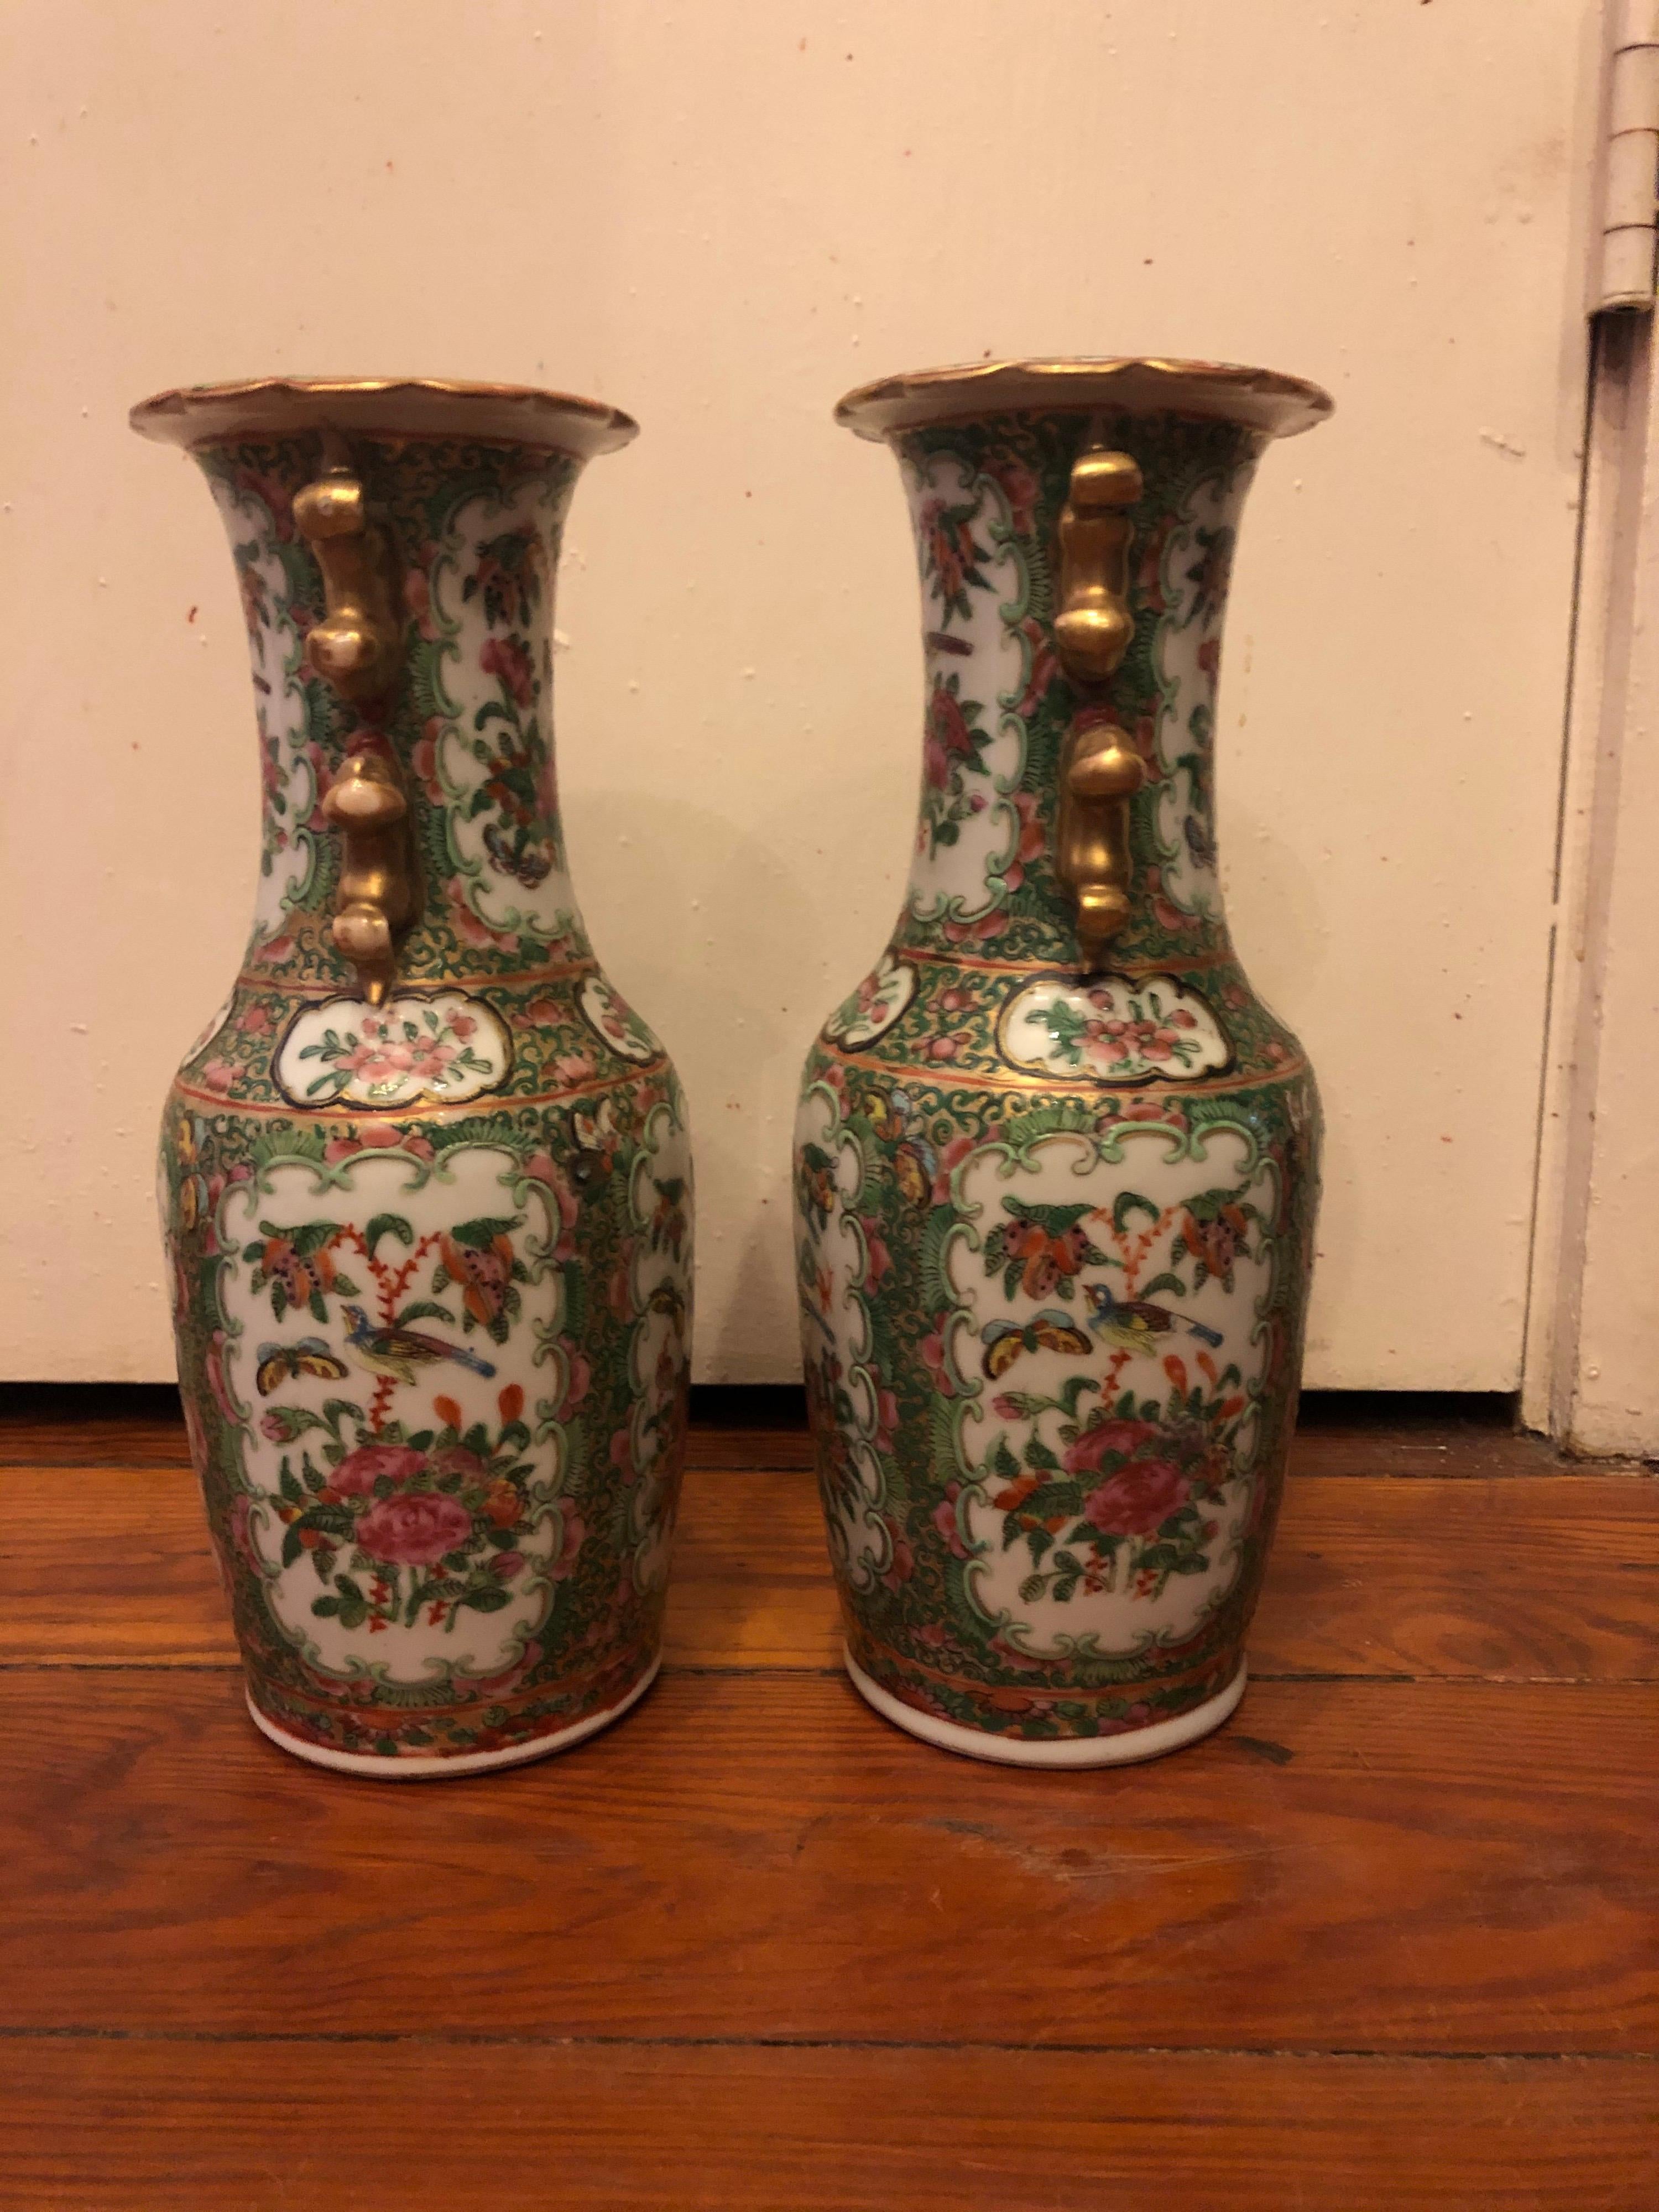 Am pair of famille rose, rose medallion, vases with gilt foo handles.